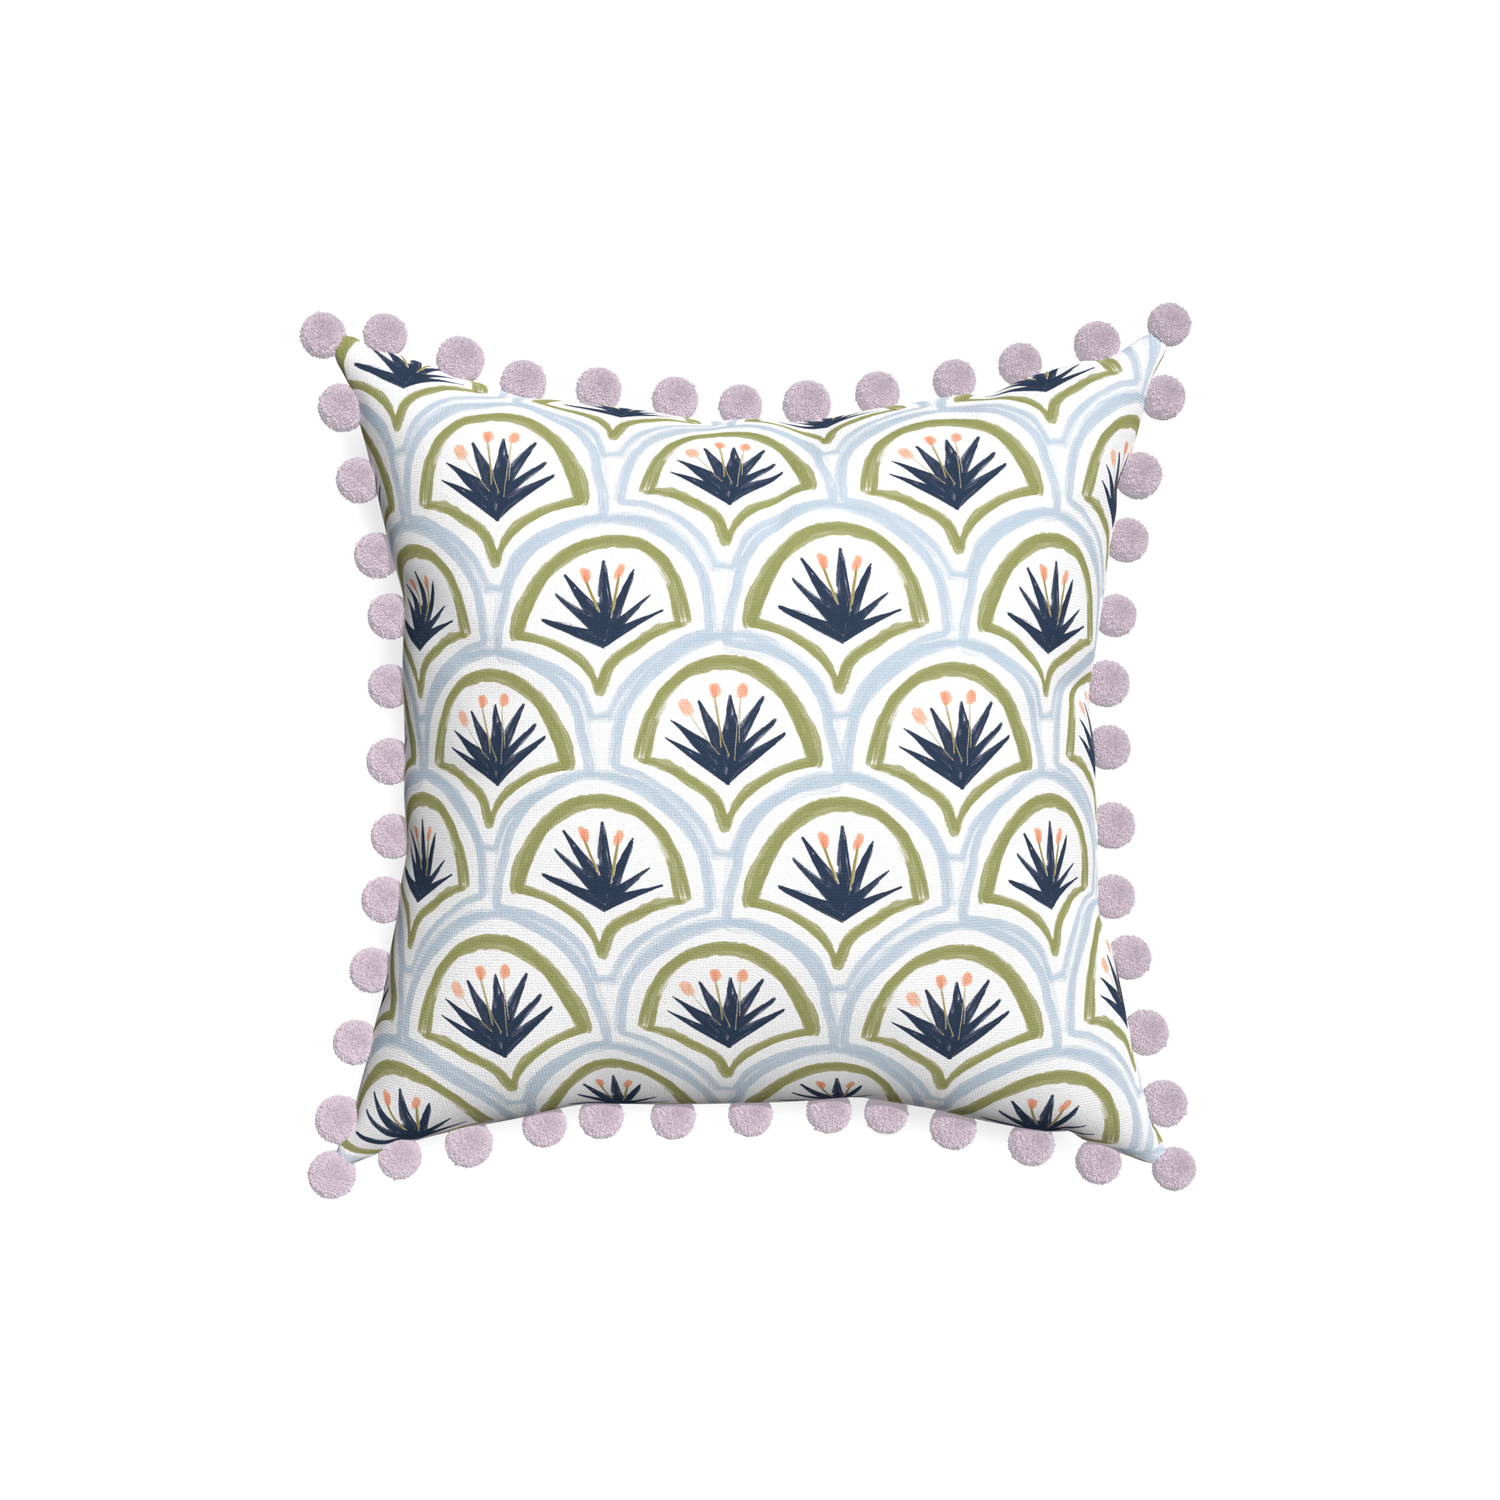 18-square thatcher midnight custom art deco palm patternpillow with l on white background